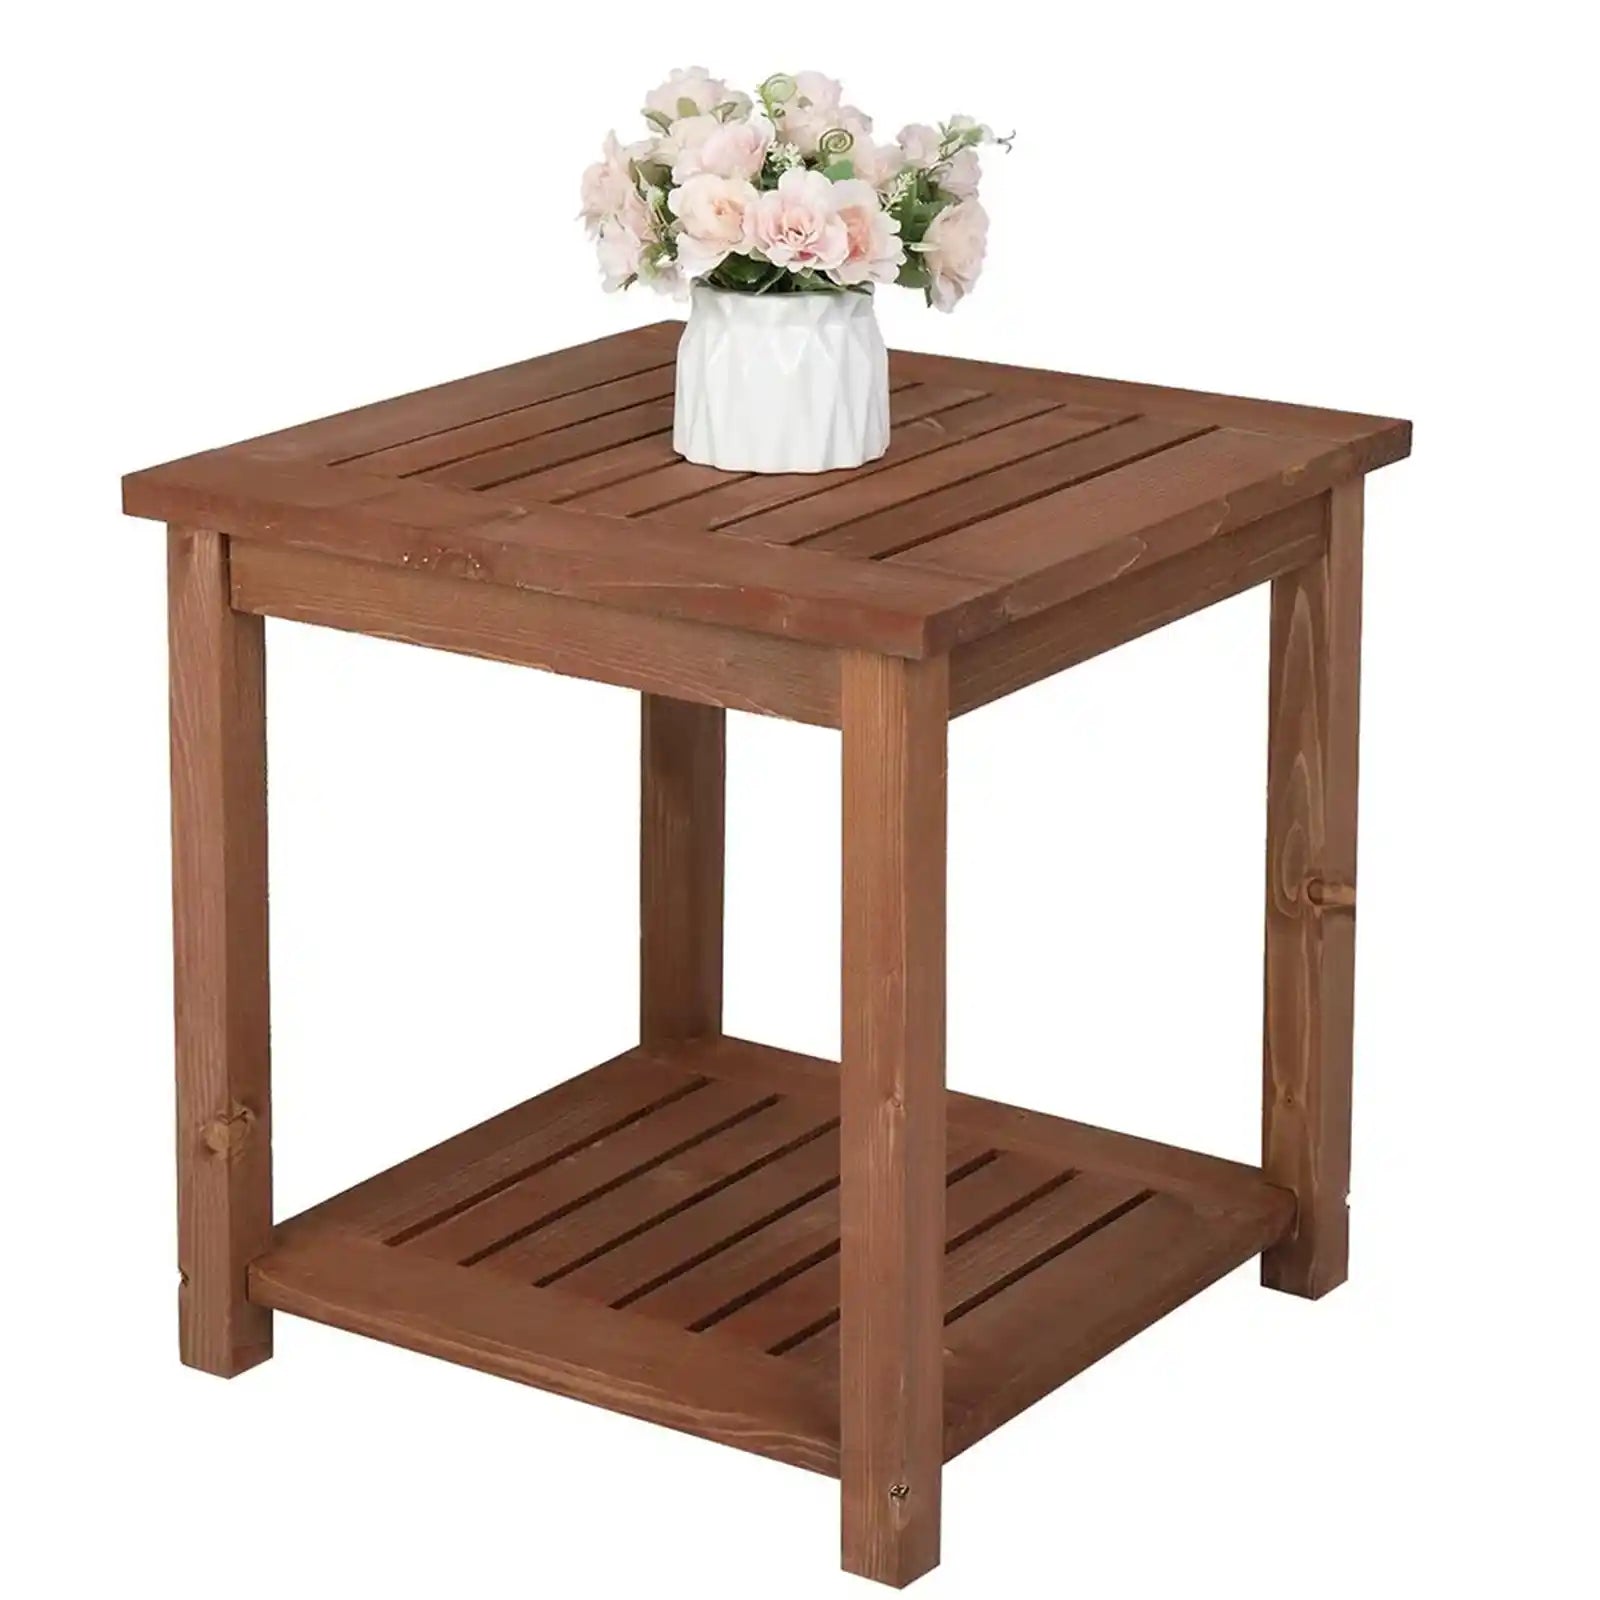 Patio Furniture Outdoor Wooden End Table, Natural,Chinese Fir,Gray, Square